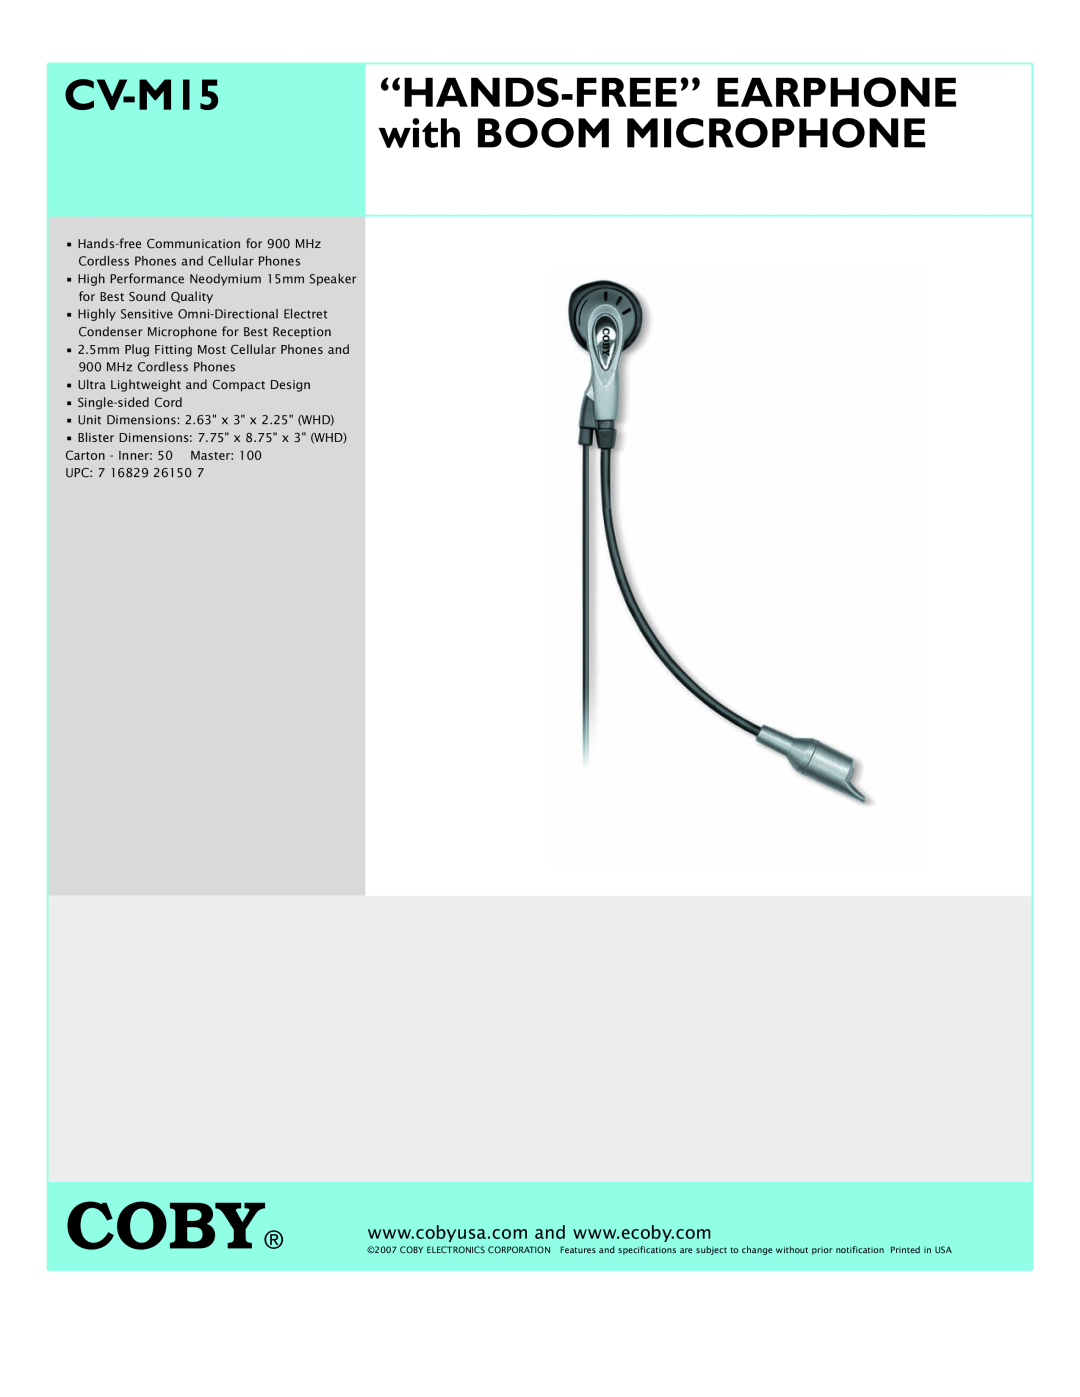 COBY electronic CV M15 specifications Coby, CV-M15, “Hands-Free”Earphone, with BOOM MICROPHONE 